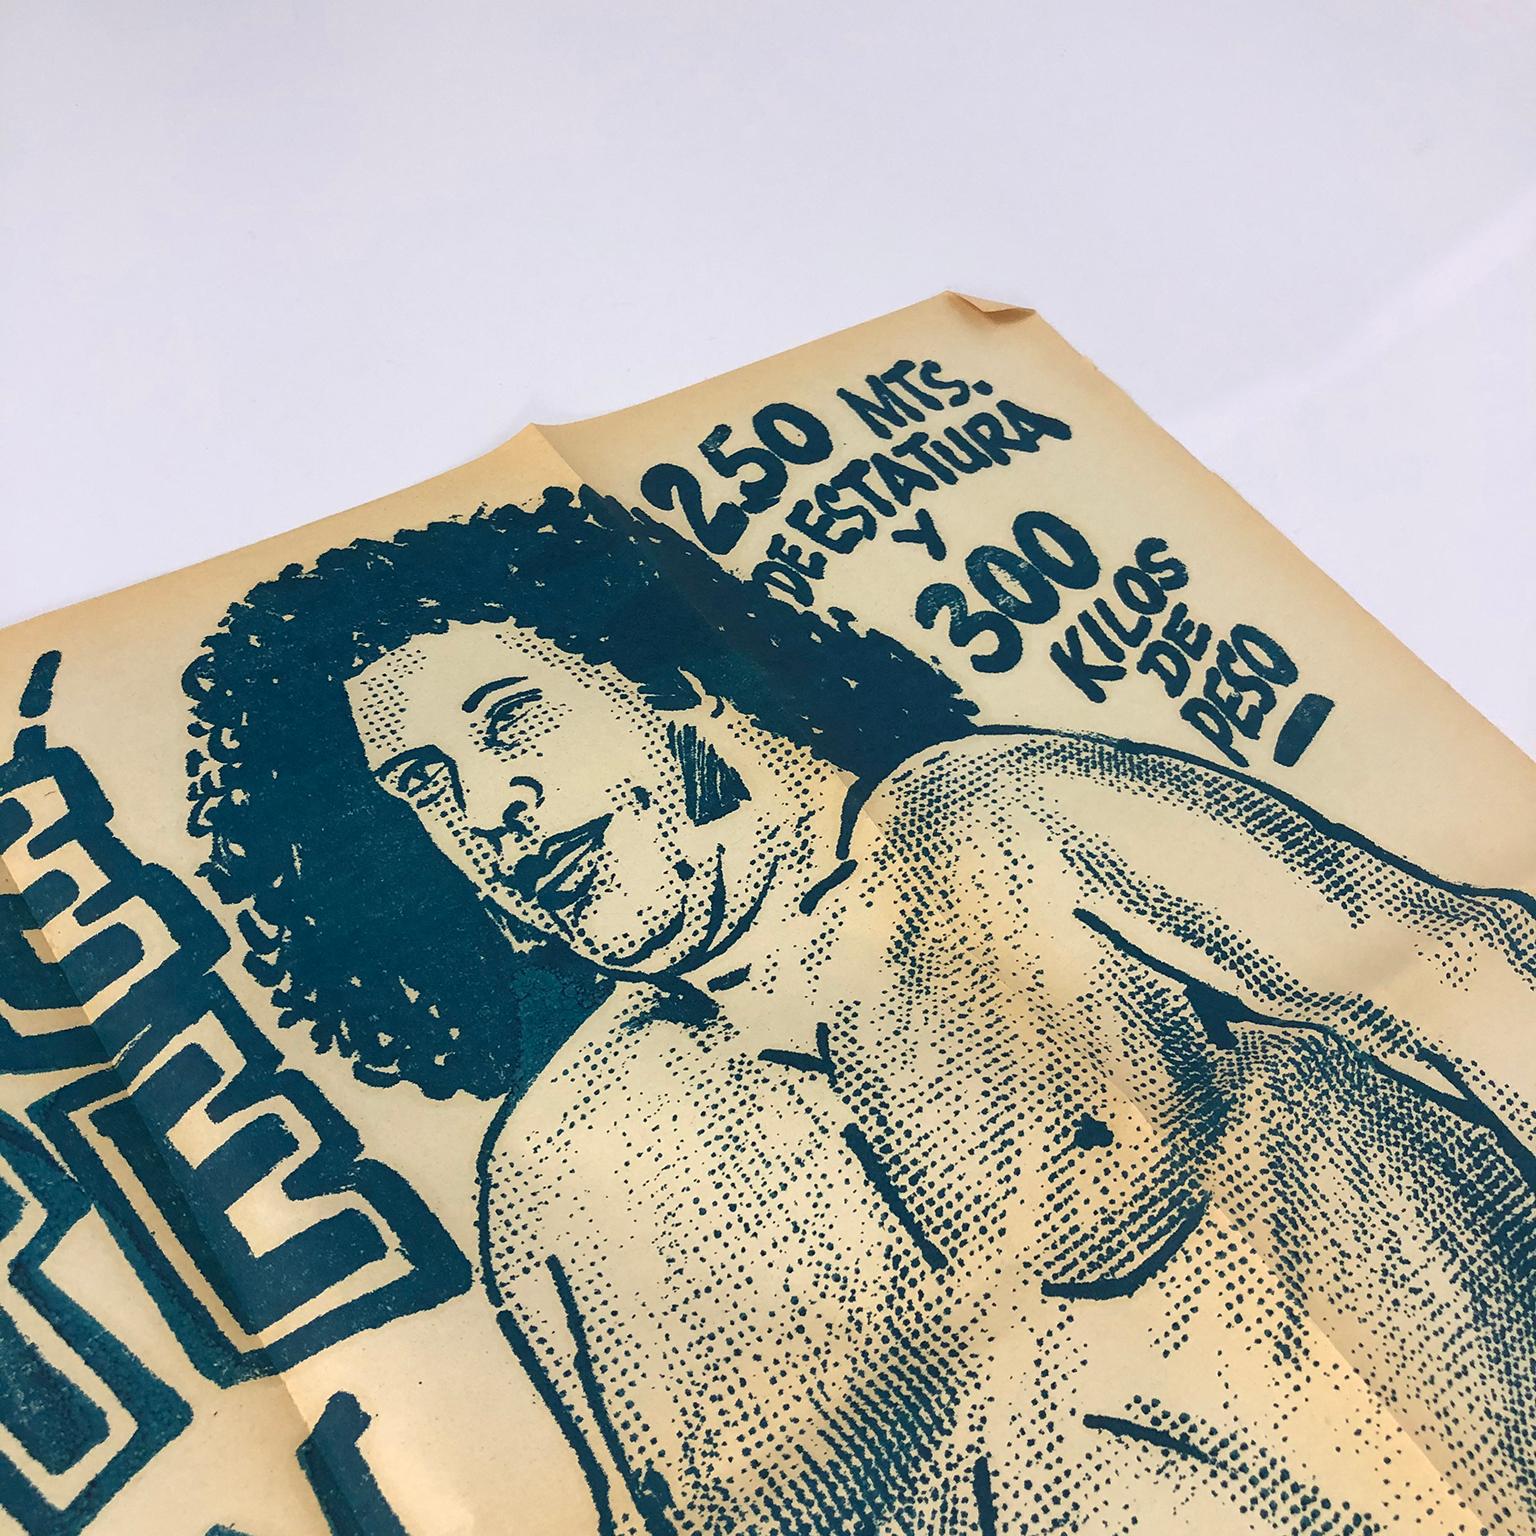 andre the giant poster